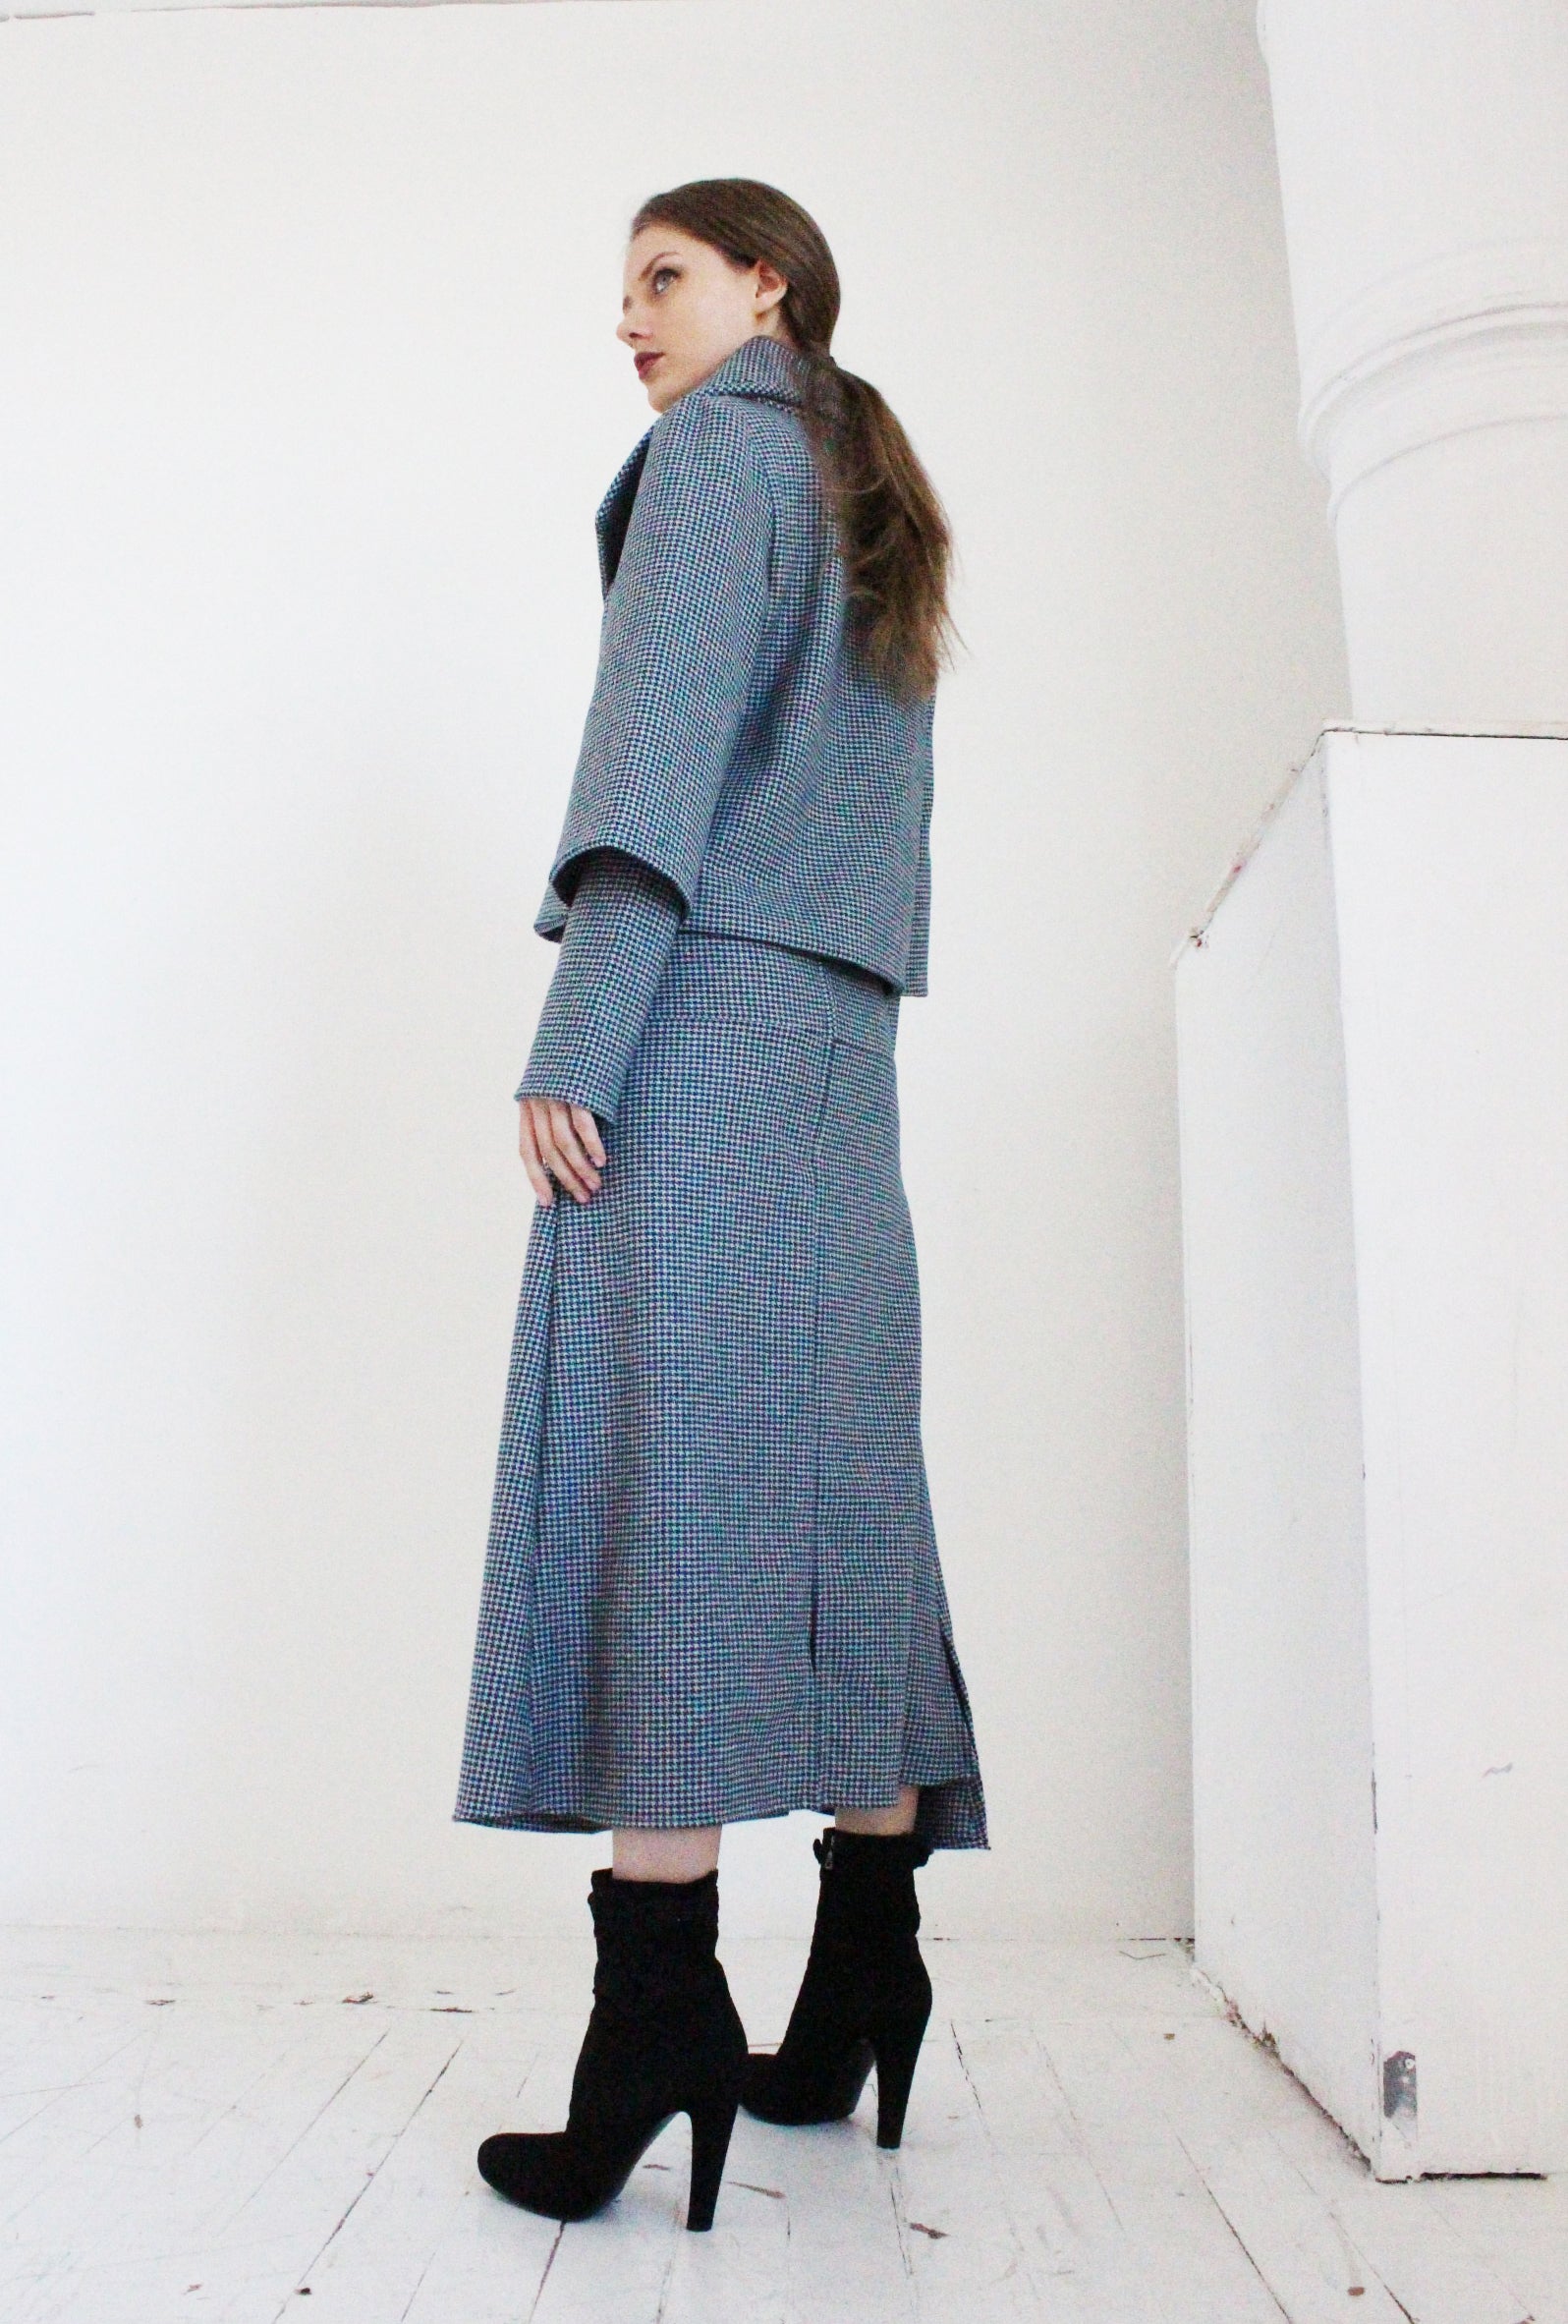 Ying Cai _ AW 21 Look 2 - 15